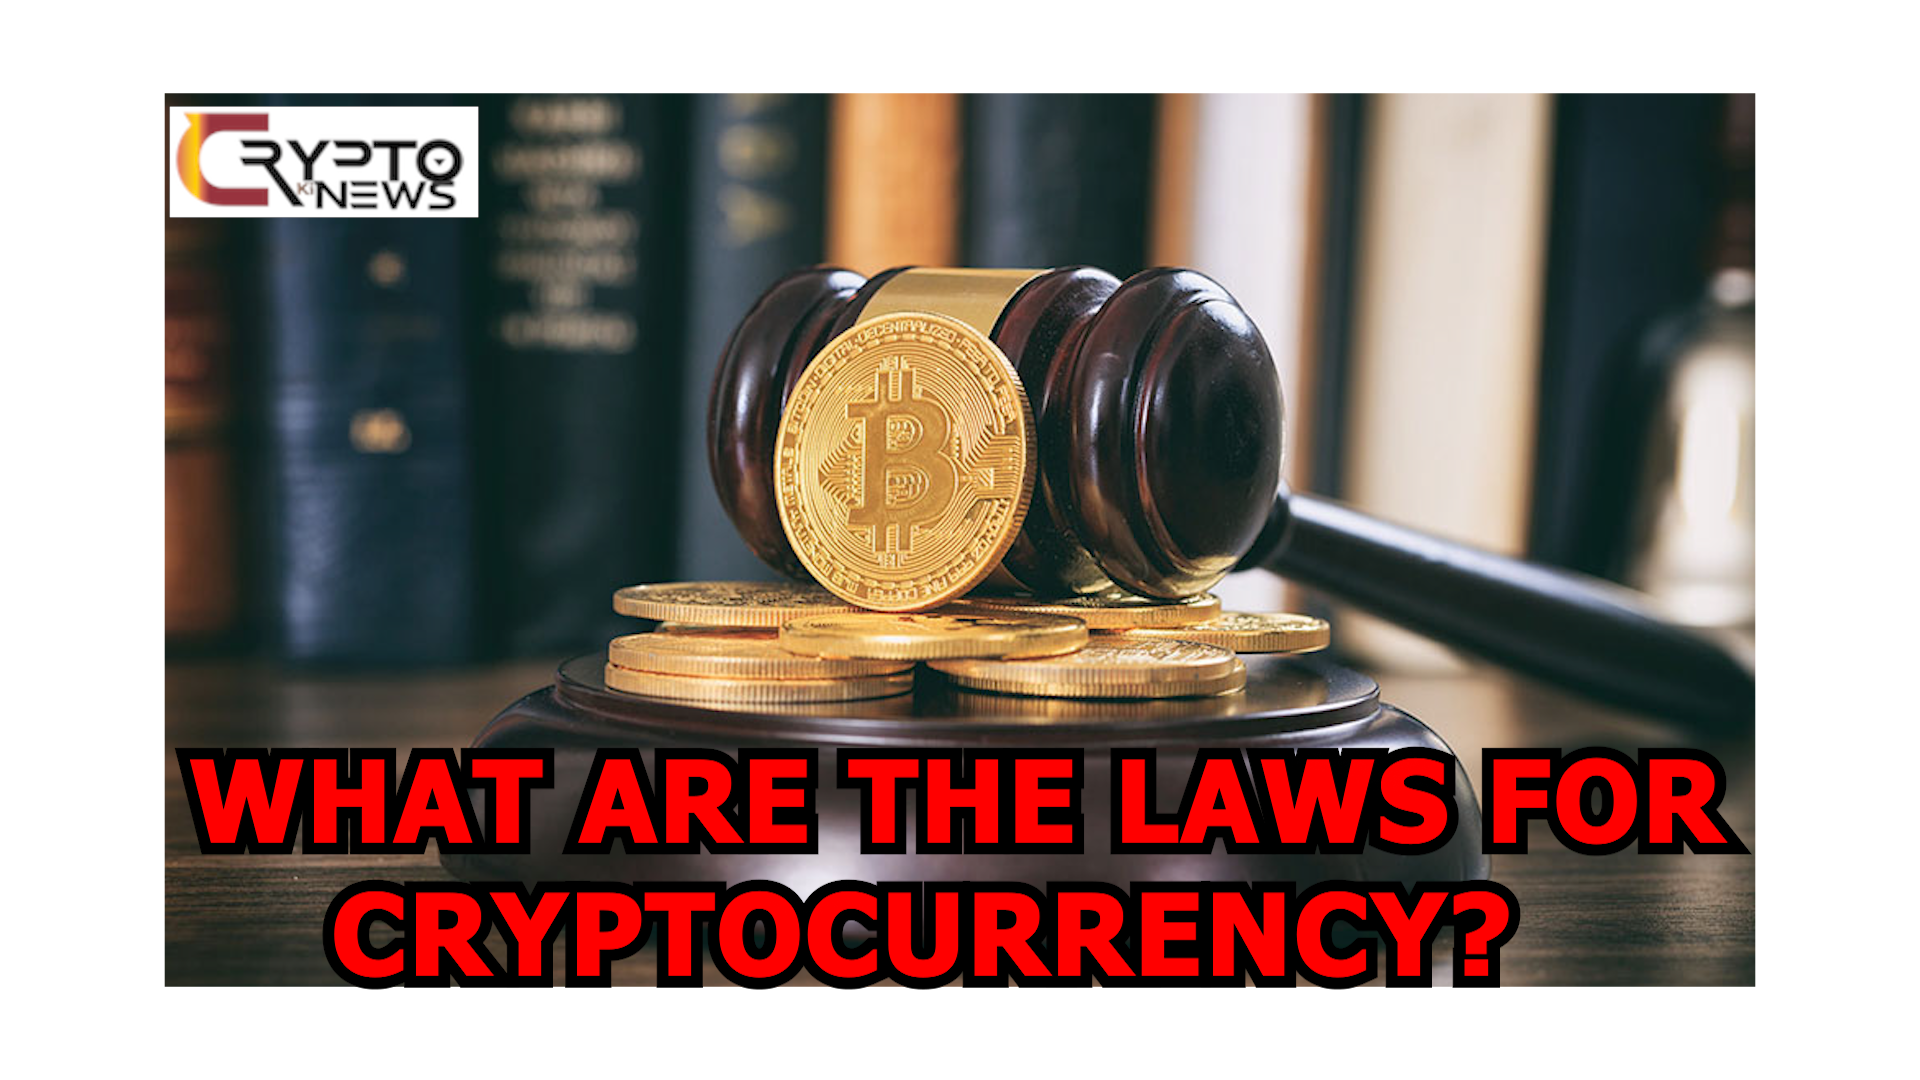 how to promote cryptocurrency sec laws